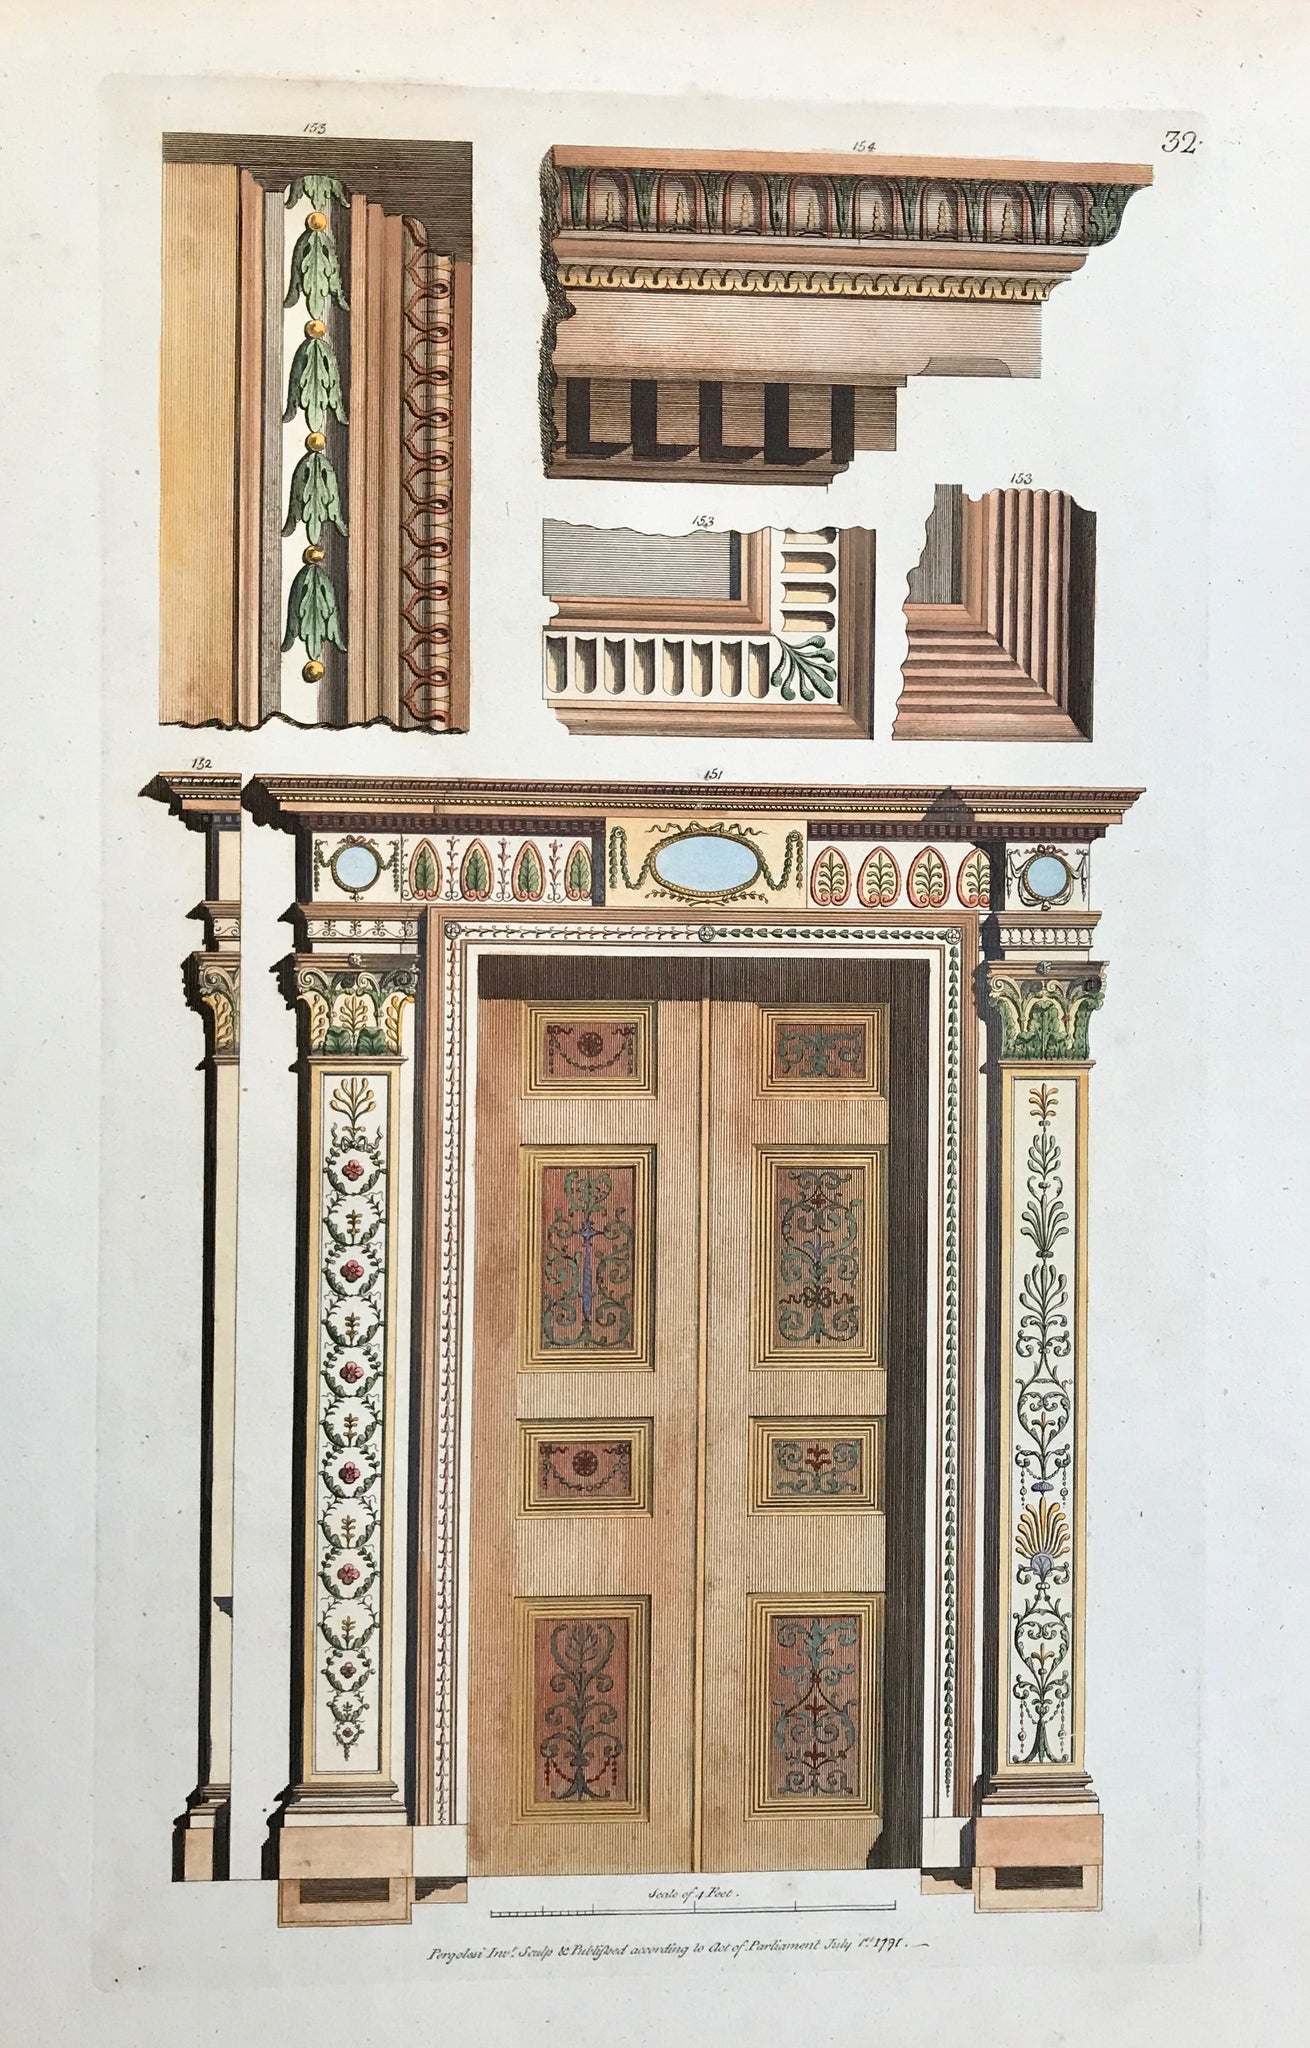 Fol. 22: Door and door frames.  Hand-colored copper etching by Michel Angelo Pergolesi.  Personal biographical details are missing. But Pergolesi moved from Italy to England, where he published his classicistic architectural designs in his book  "Designs for various ornaments"  London, 1791  Pergolesi's mentor was the neoclassical architect and furniture designer Robert Adam.